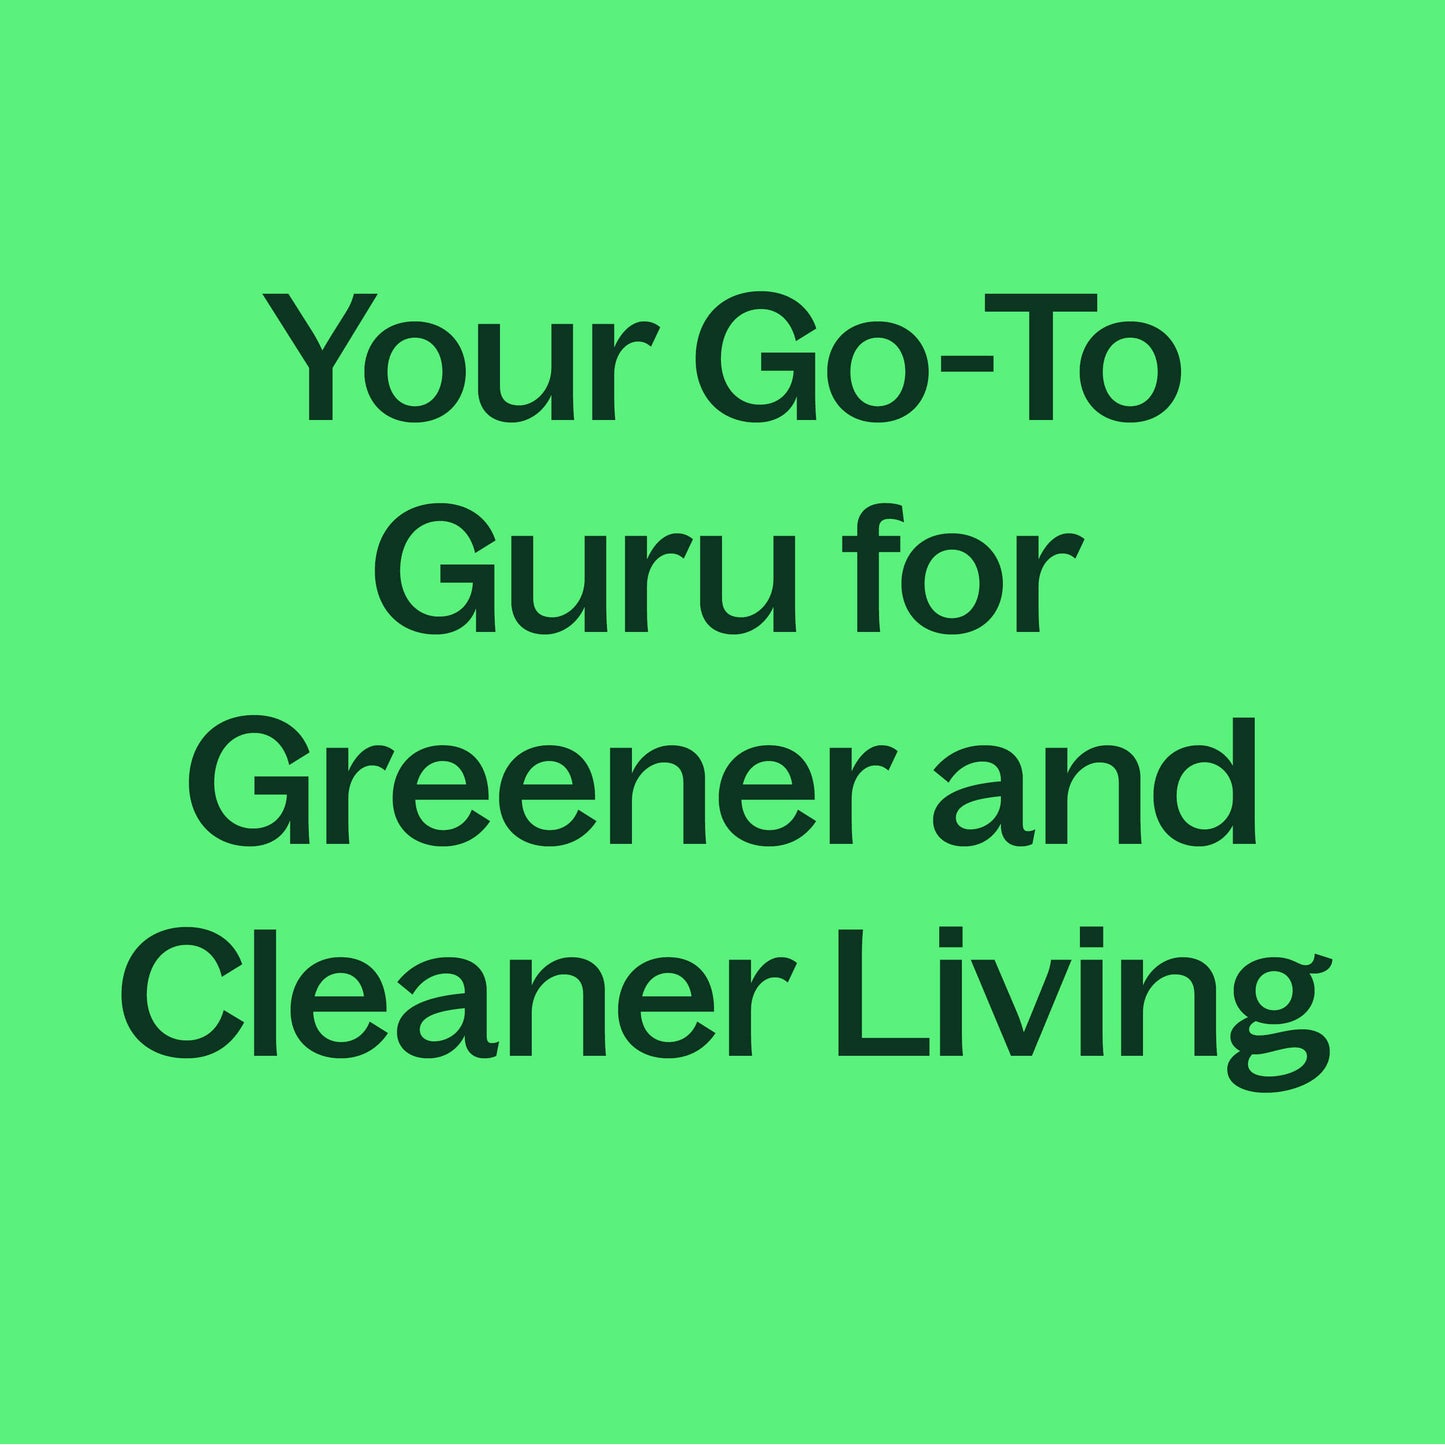 your go-to guru for greener and cleaner living